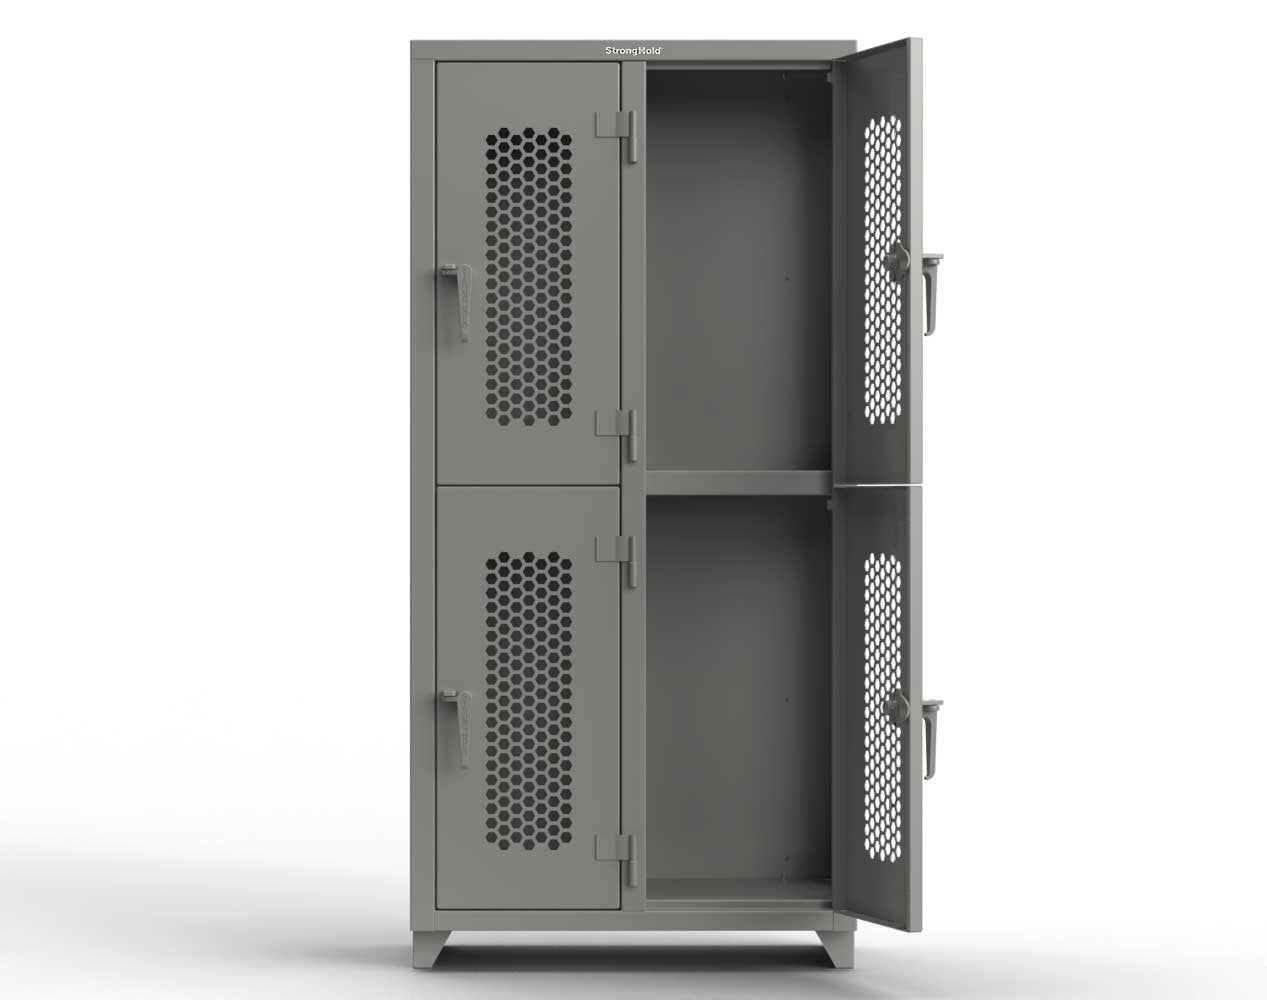 Extra Heavy Duty 14 GA Double-Tier Ventilated Locker, 4 Compartments - 36 in. W x 18 in. D x 75 in. H